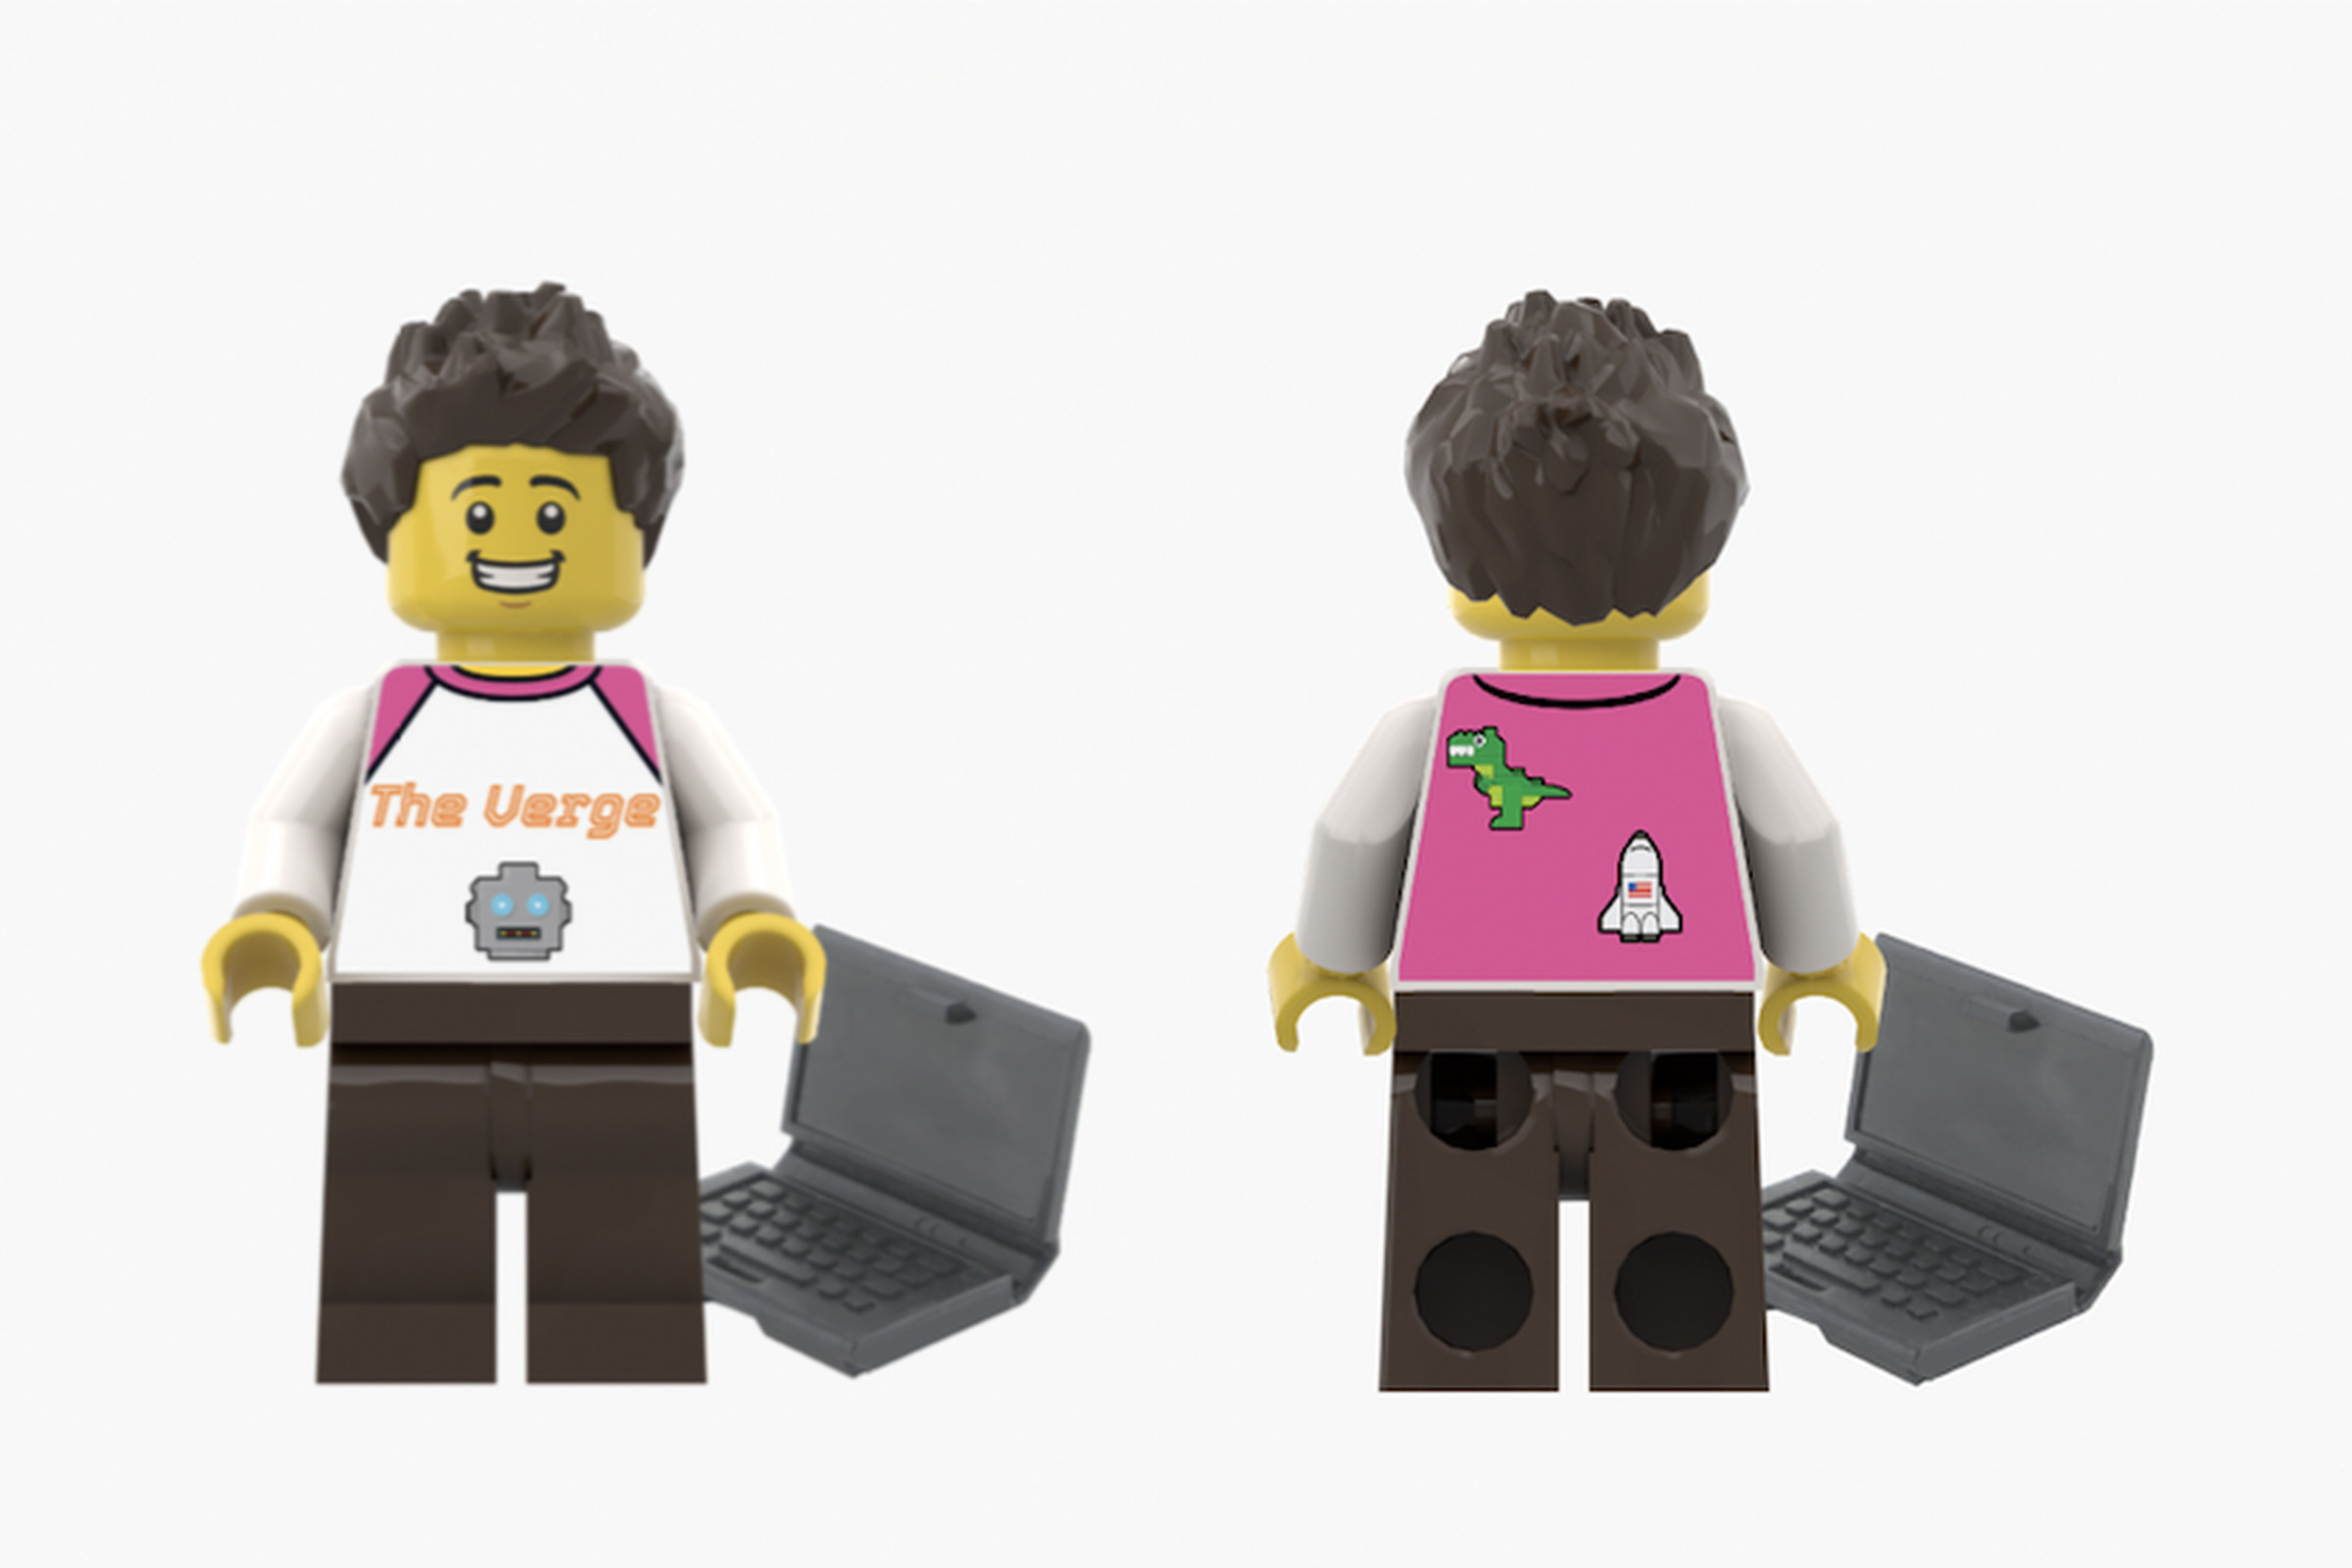 You too can make a Verge-themed Lego minifigure.